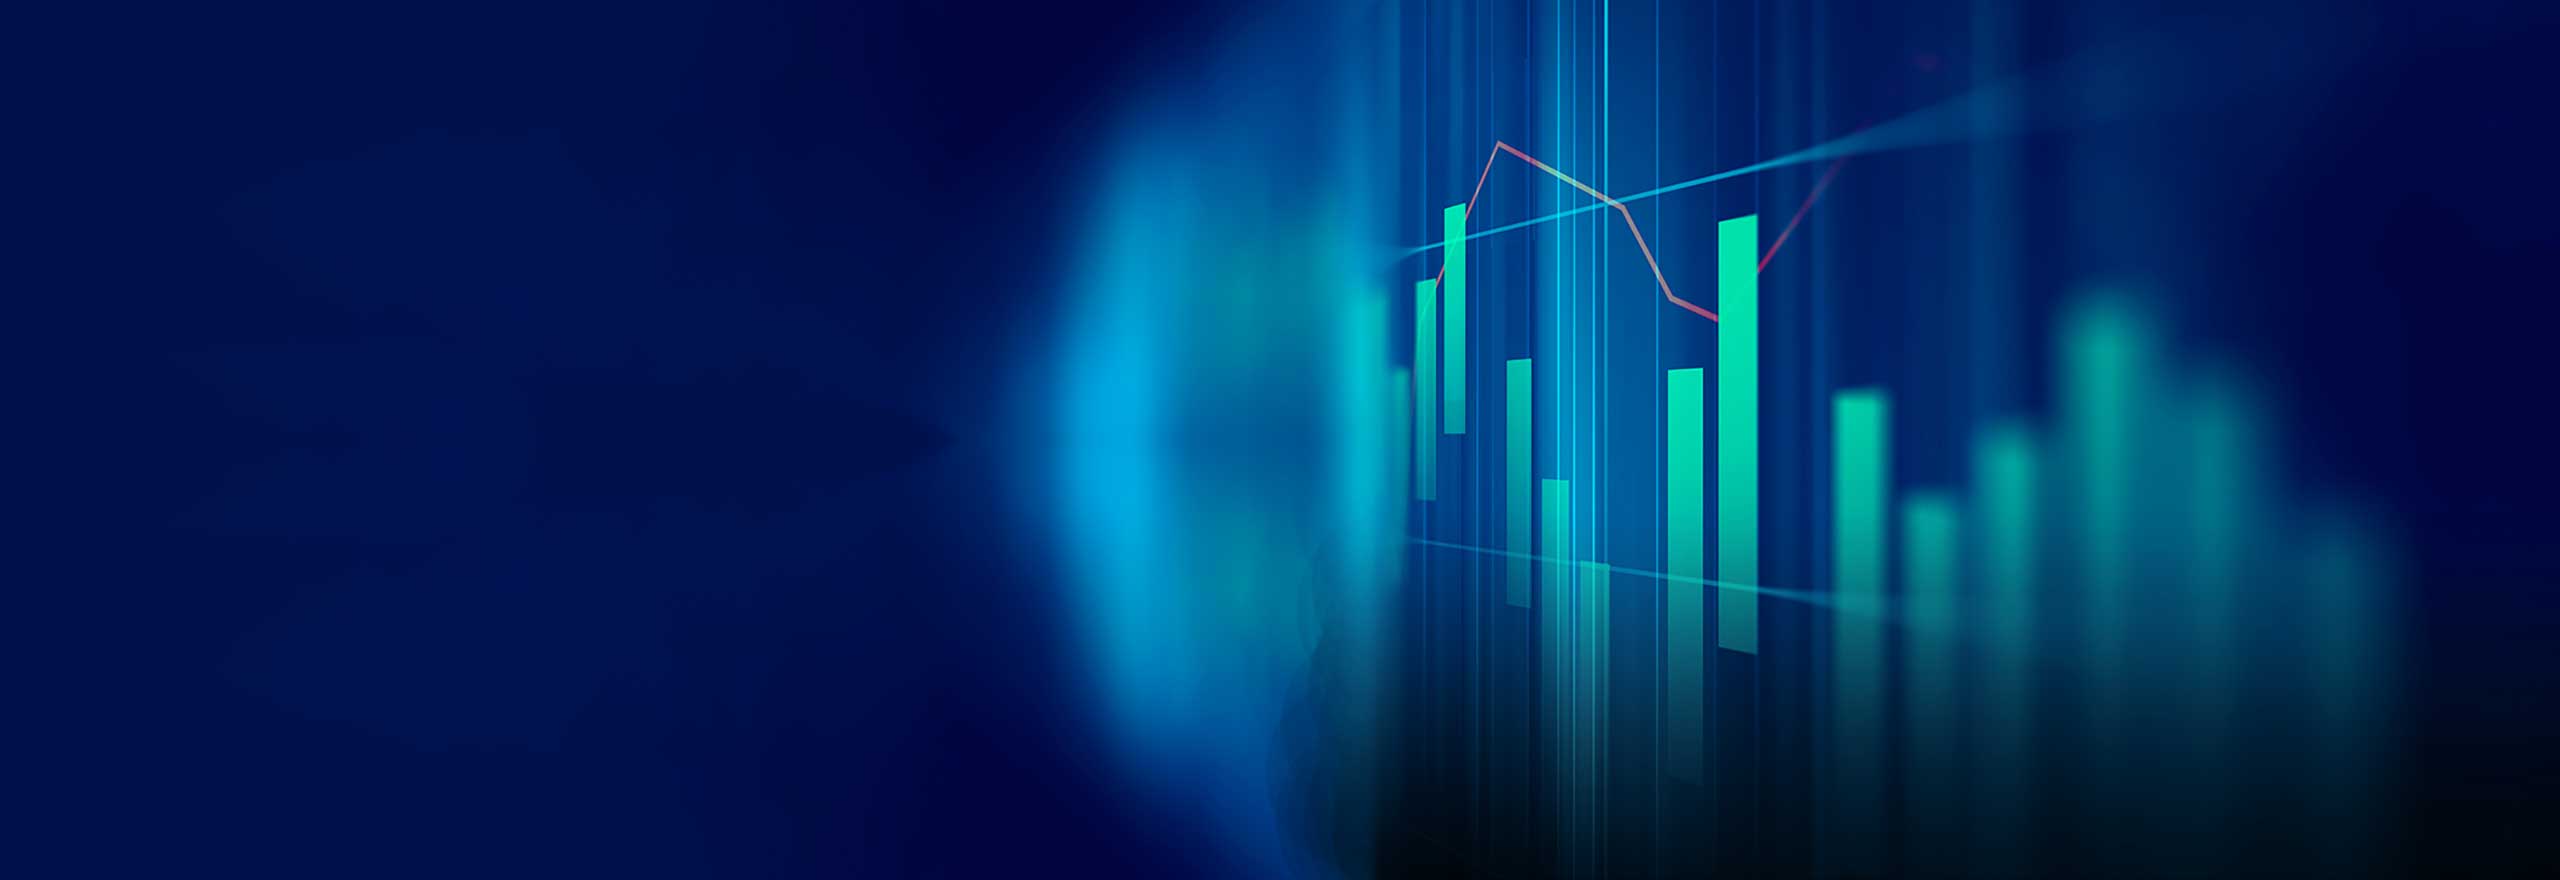 Conceptual image showing statistical bar and line graphs on an illuminated background.